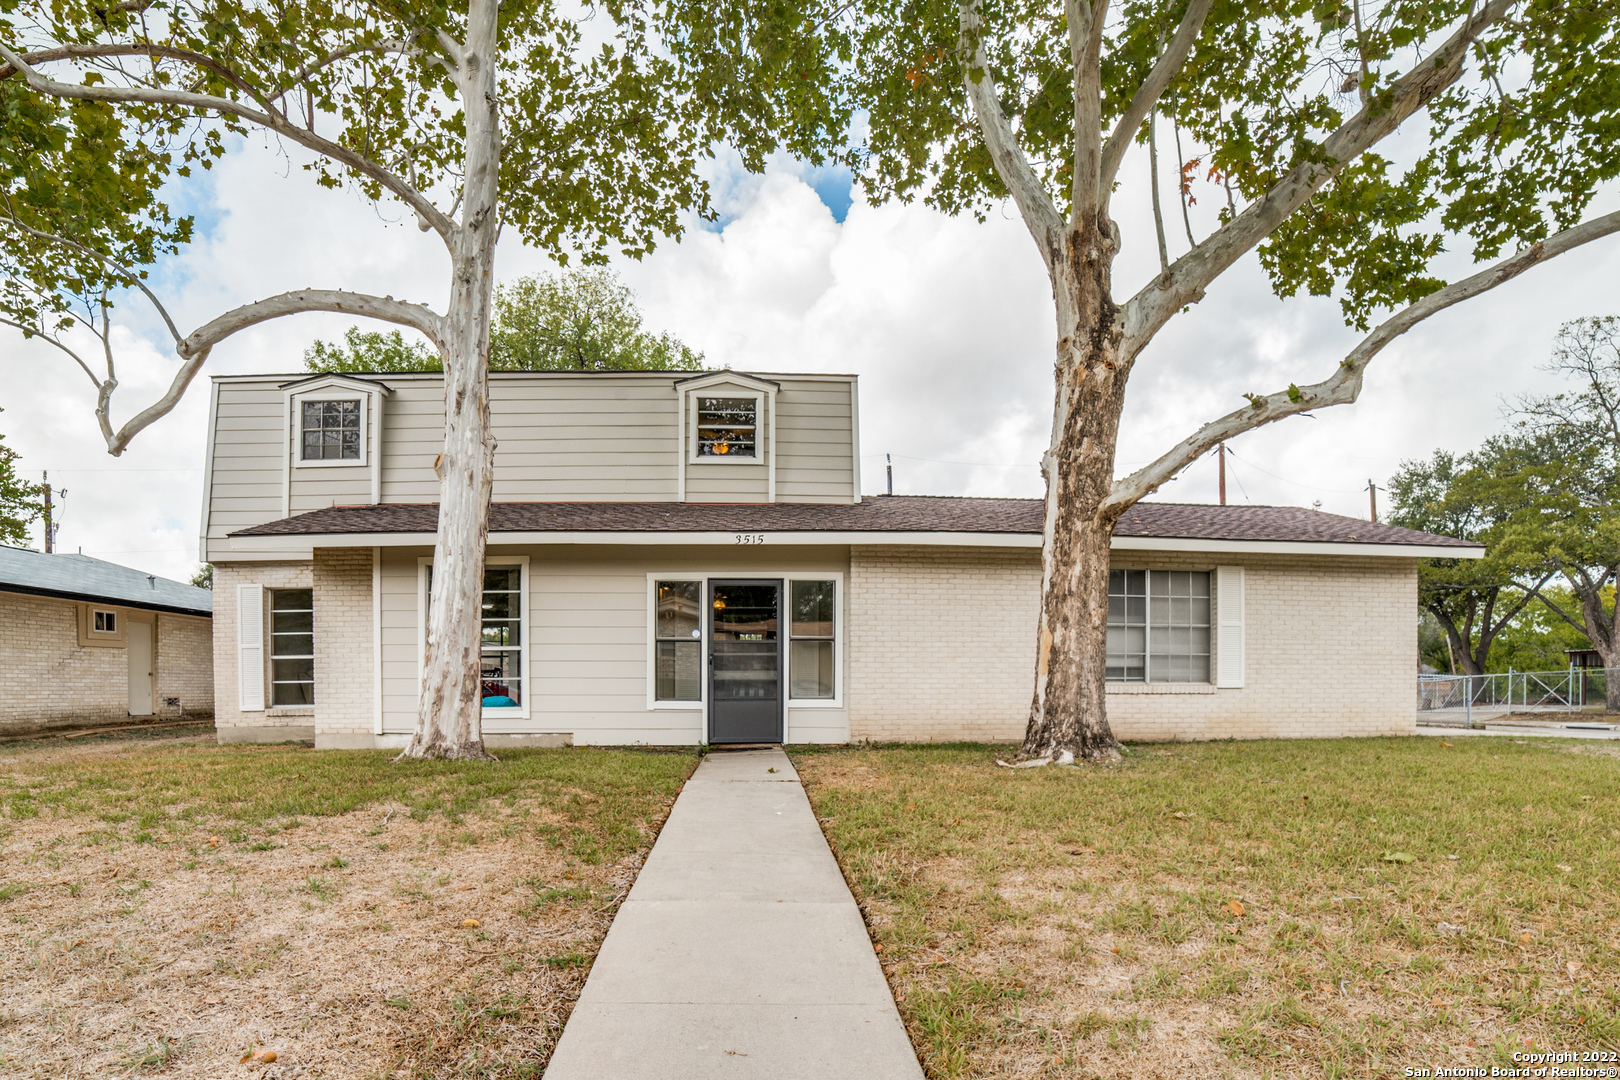 Recently updated home on a corner lot. Spacious floor plan that has waterproof LVT flooring. Fresh paint and texture, granite countertops and open kitchen. Schedule a showing today!